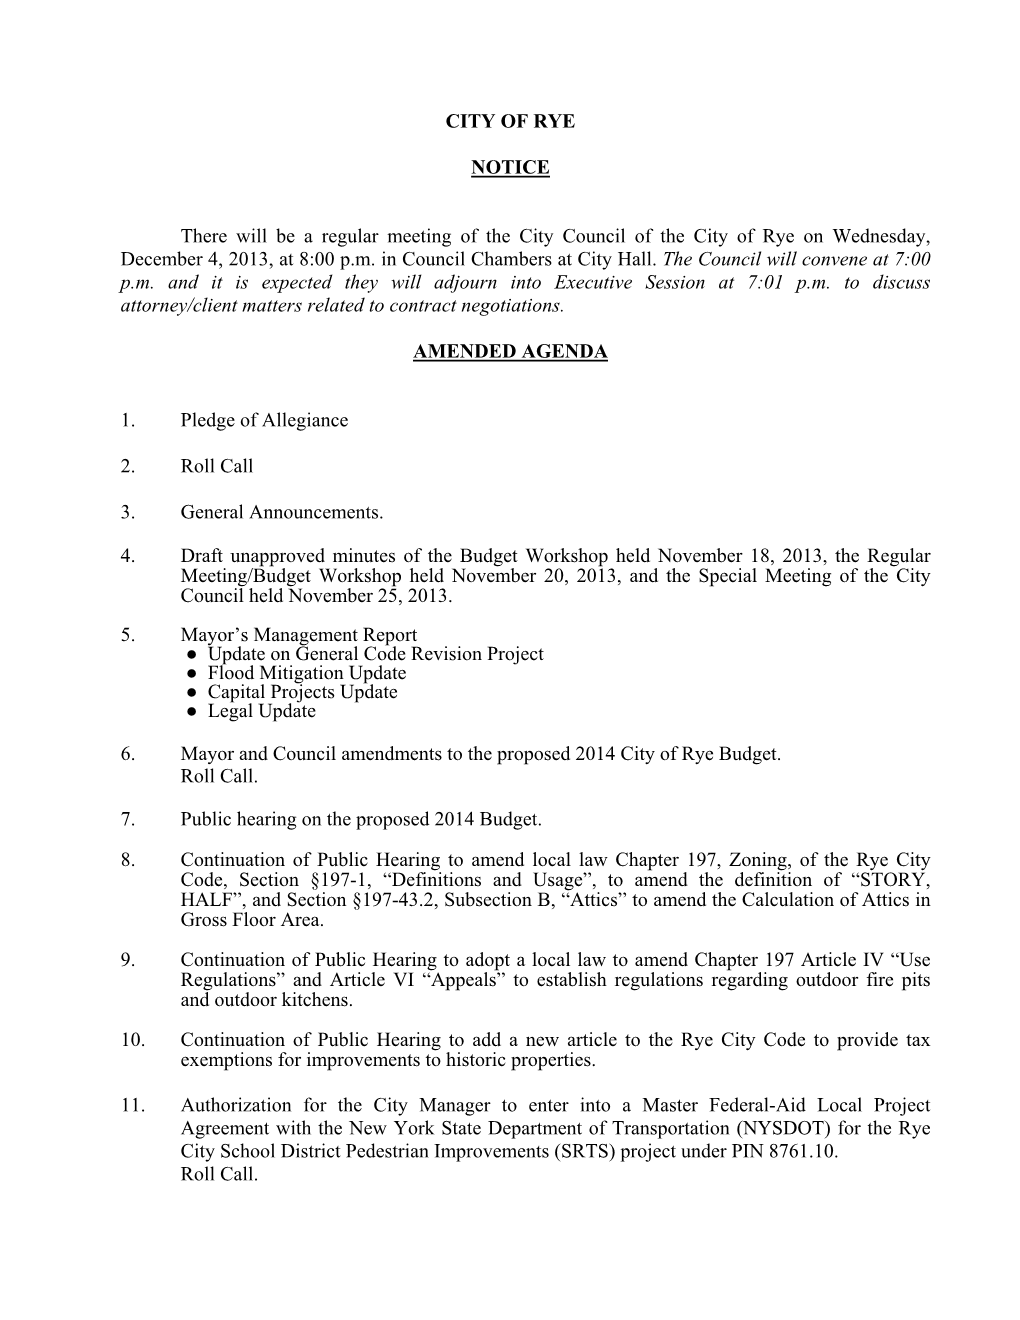 CITY of RYE NOTICE There Will Be a Regular Meeting of the City Council